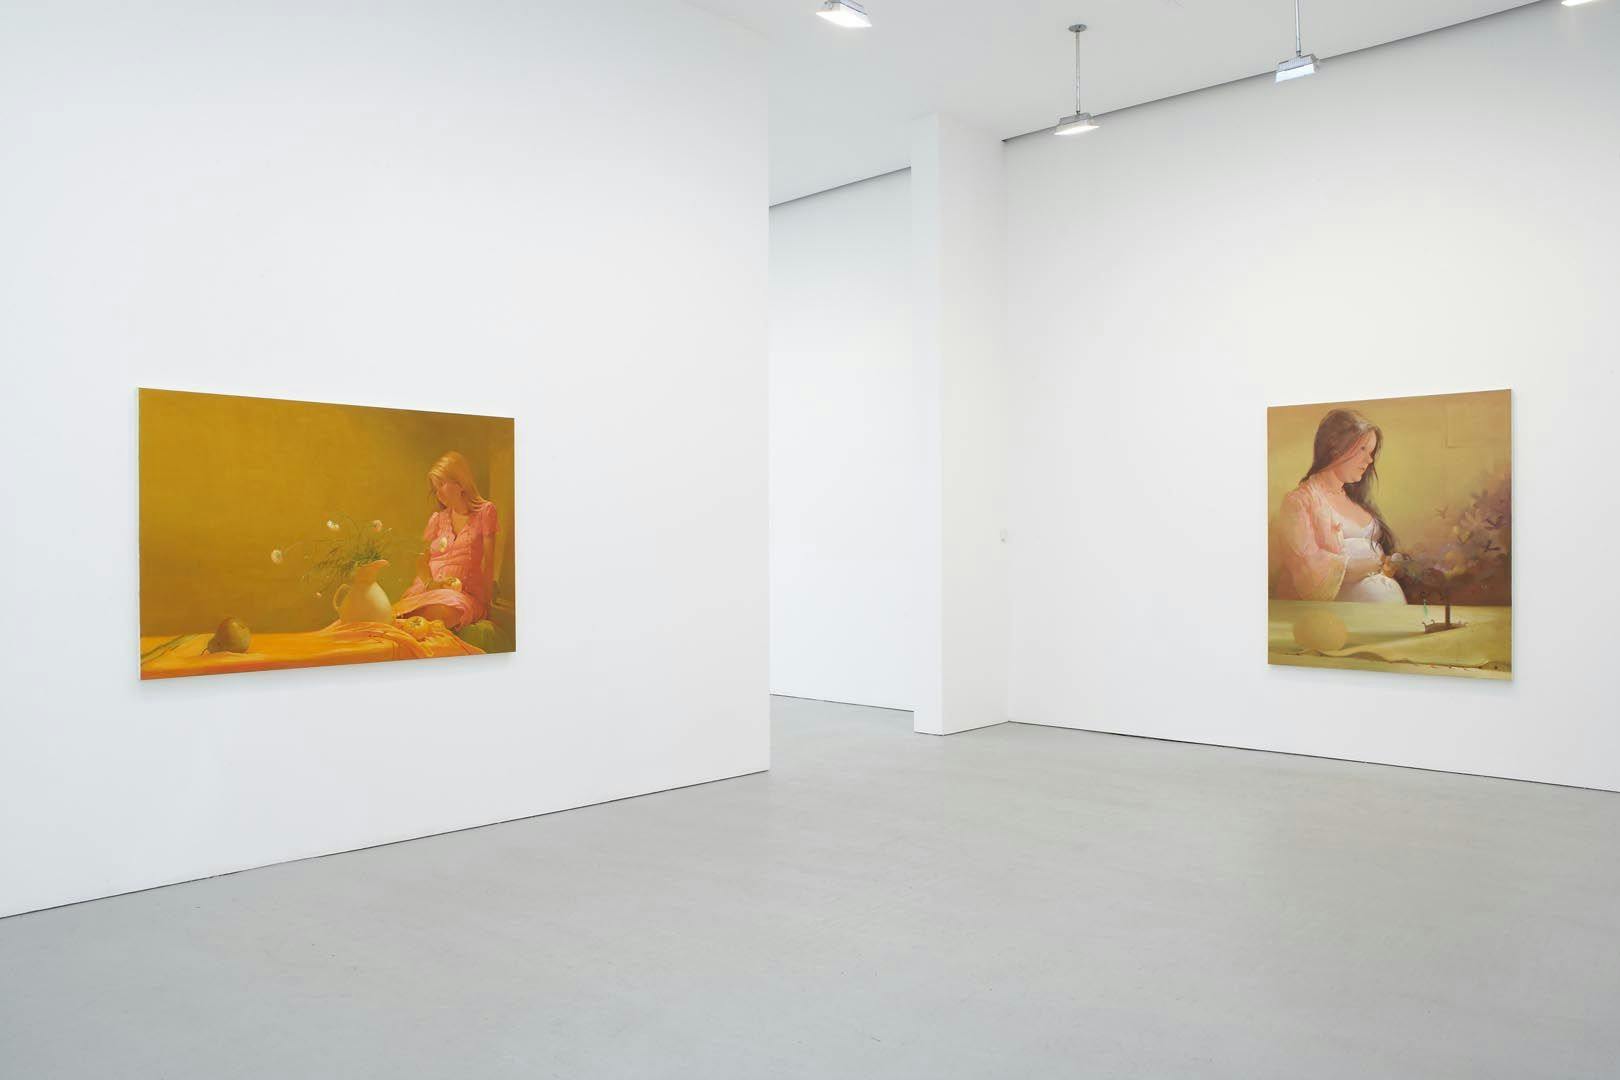 An installation view featuring works by Carol Bove and Harold Ancart, dated 2019